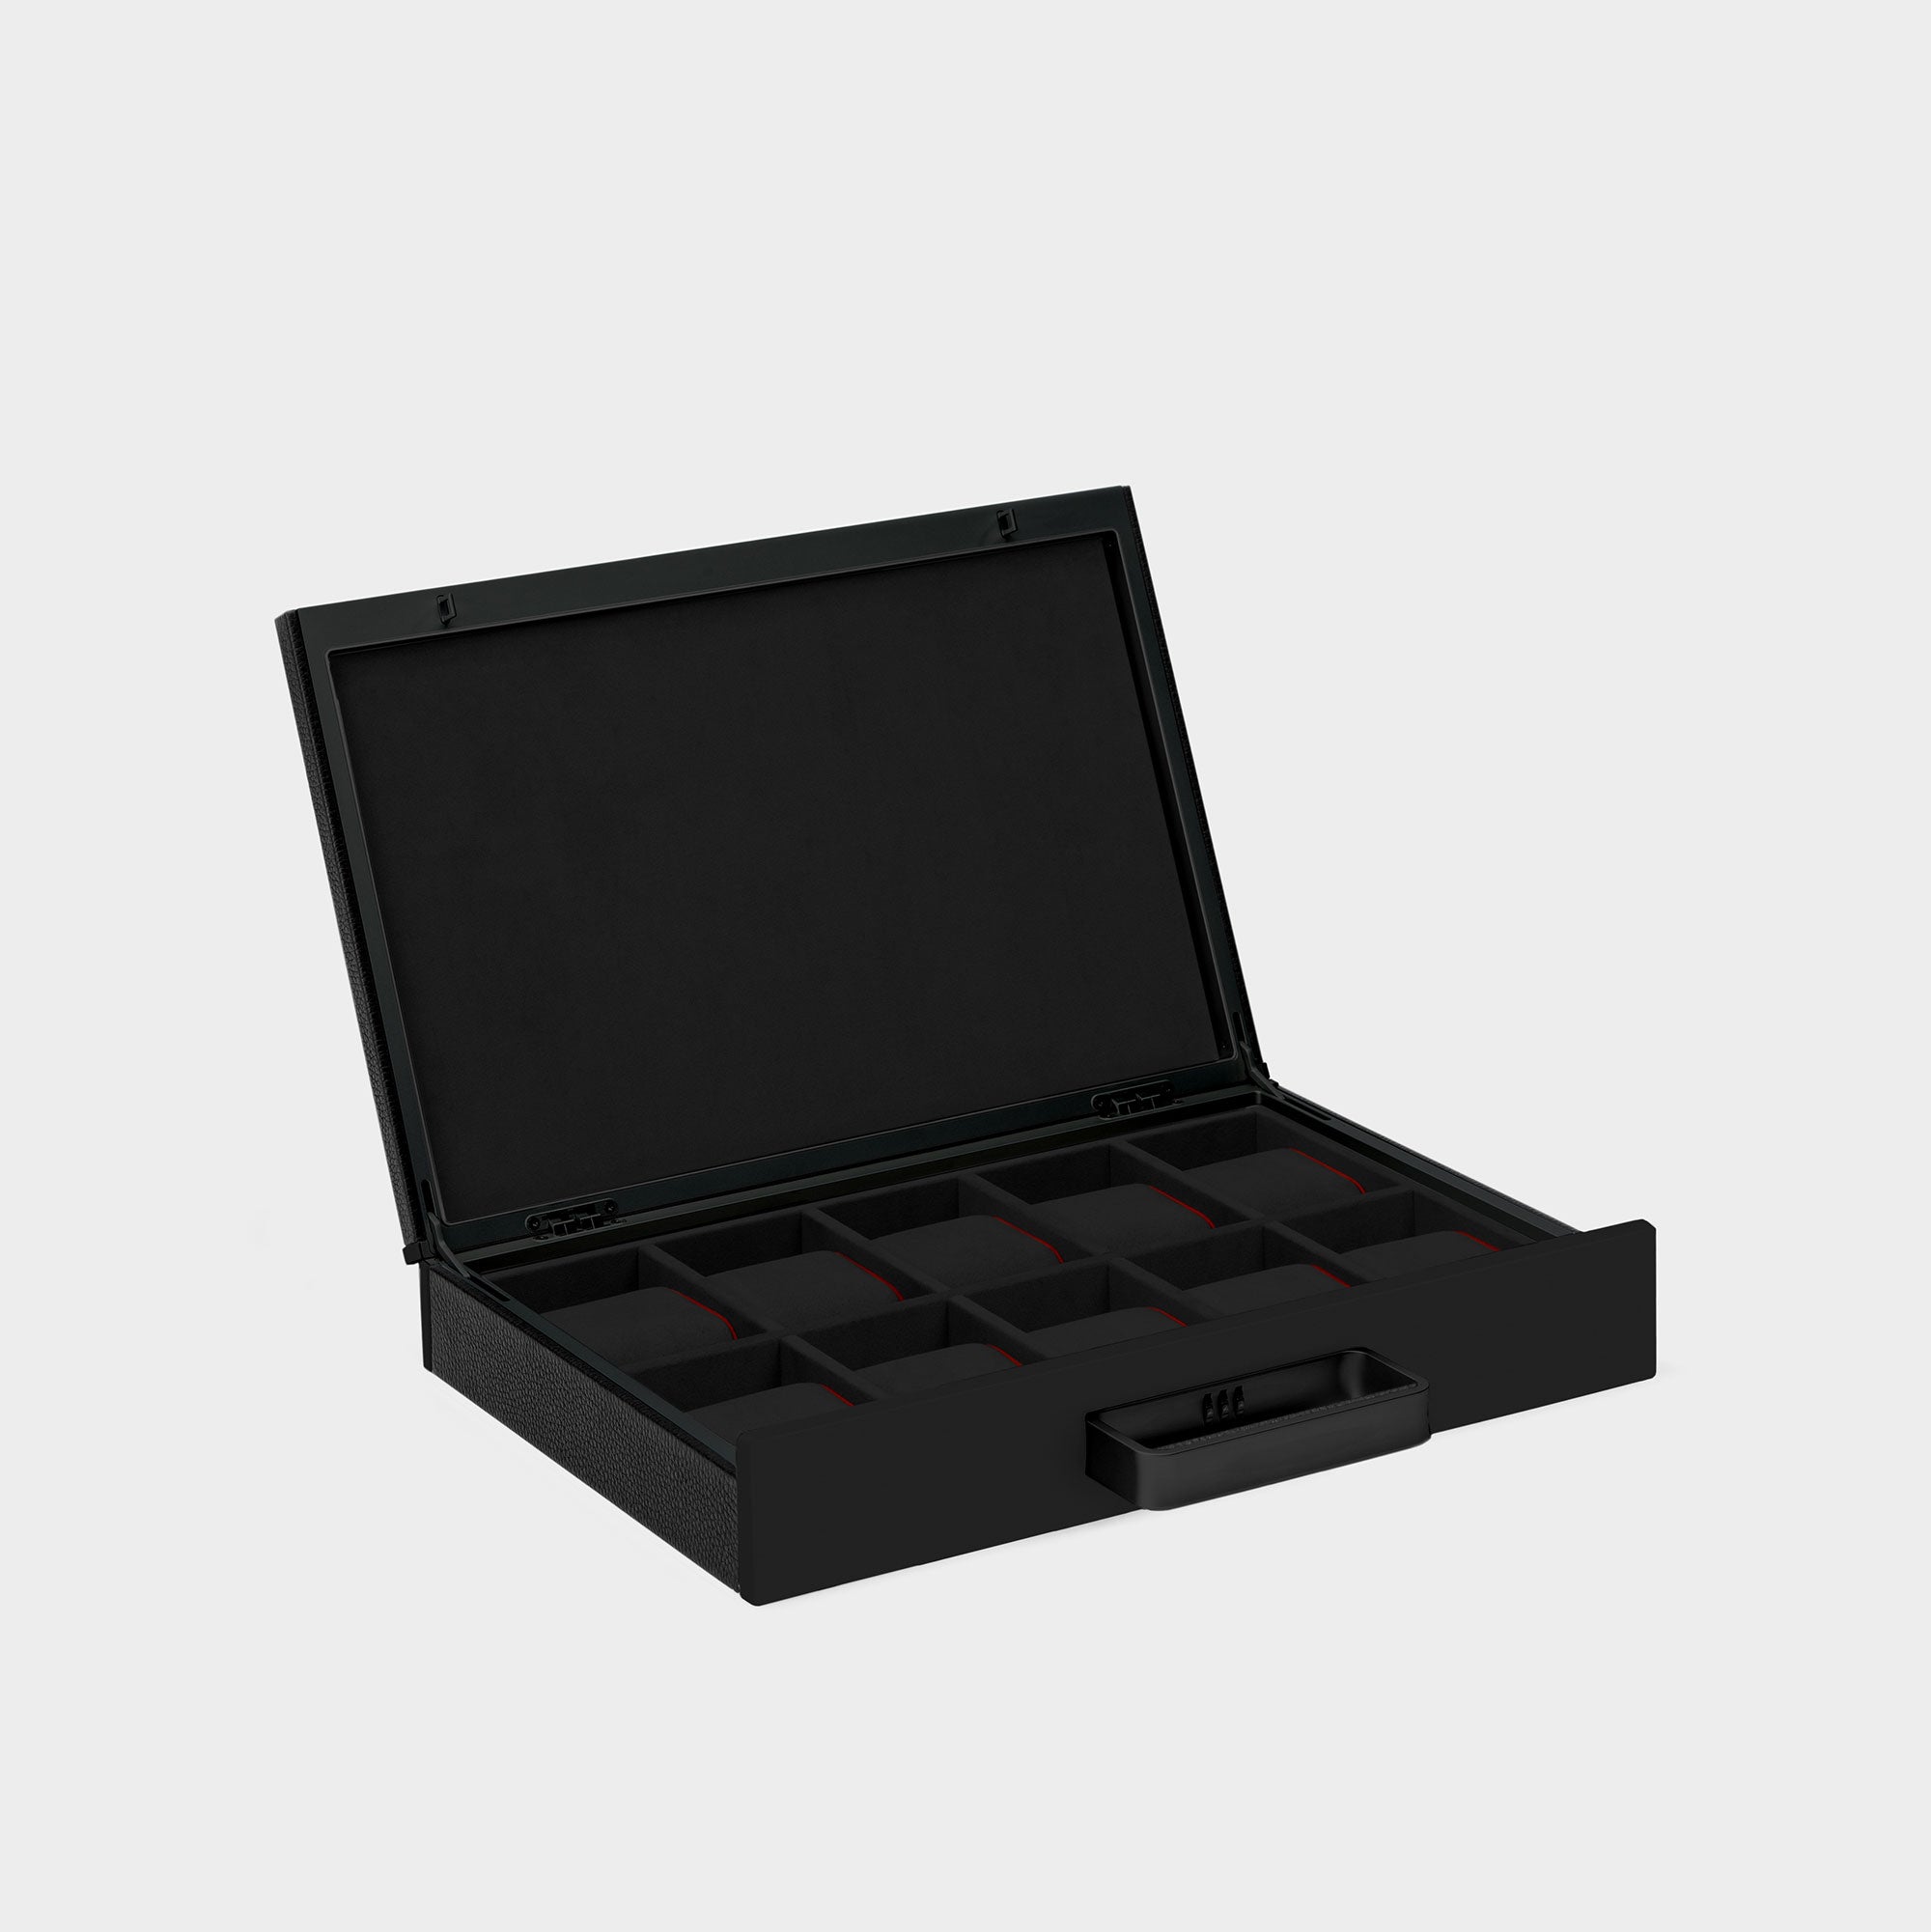 Designer watch briefcase in all black with red leather accents on the lid, handle, and cushion sides. 